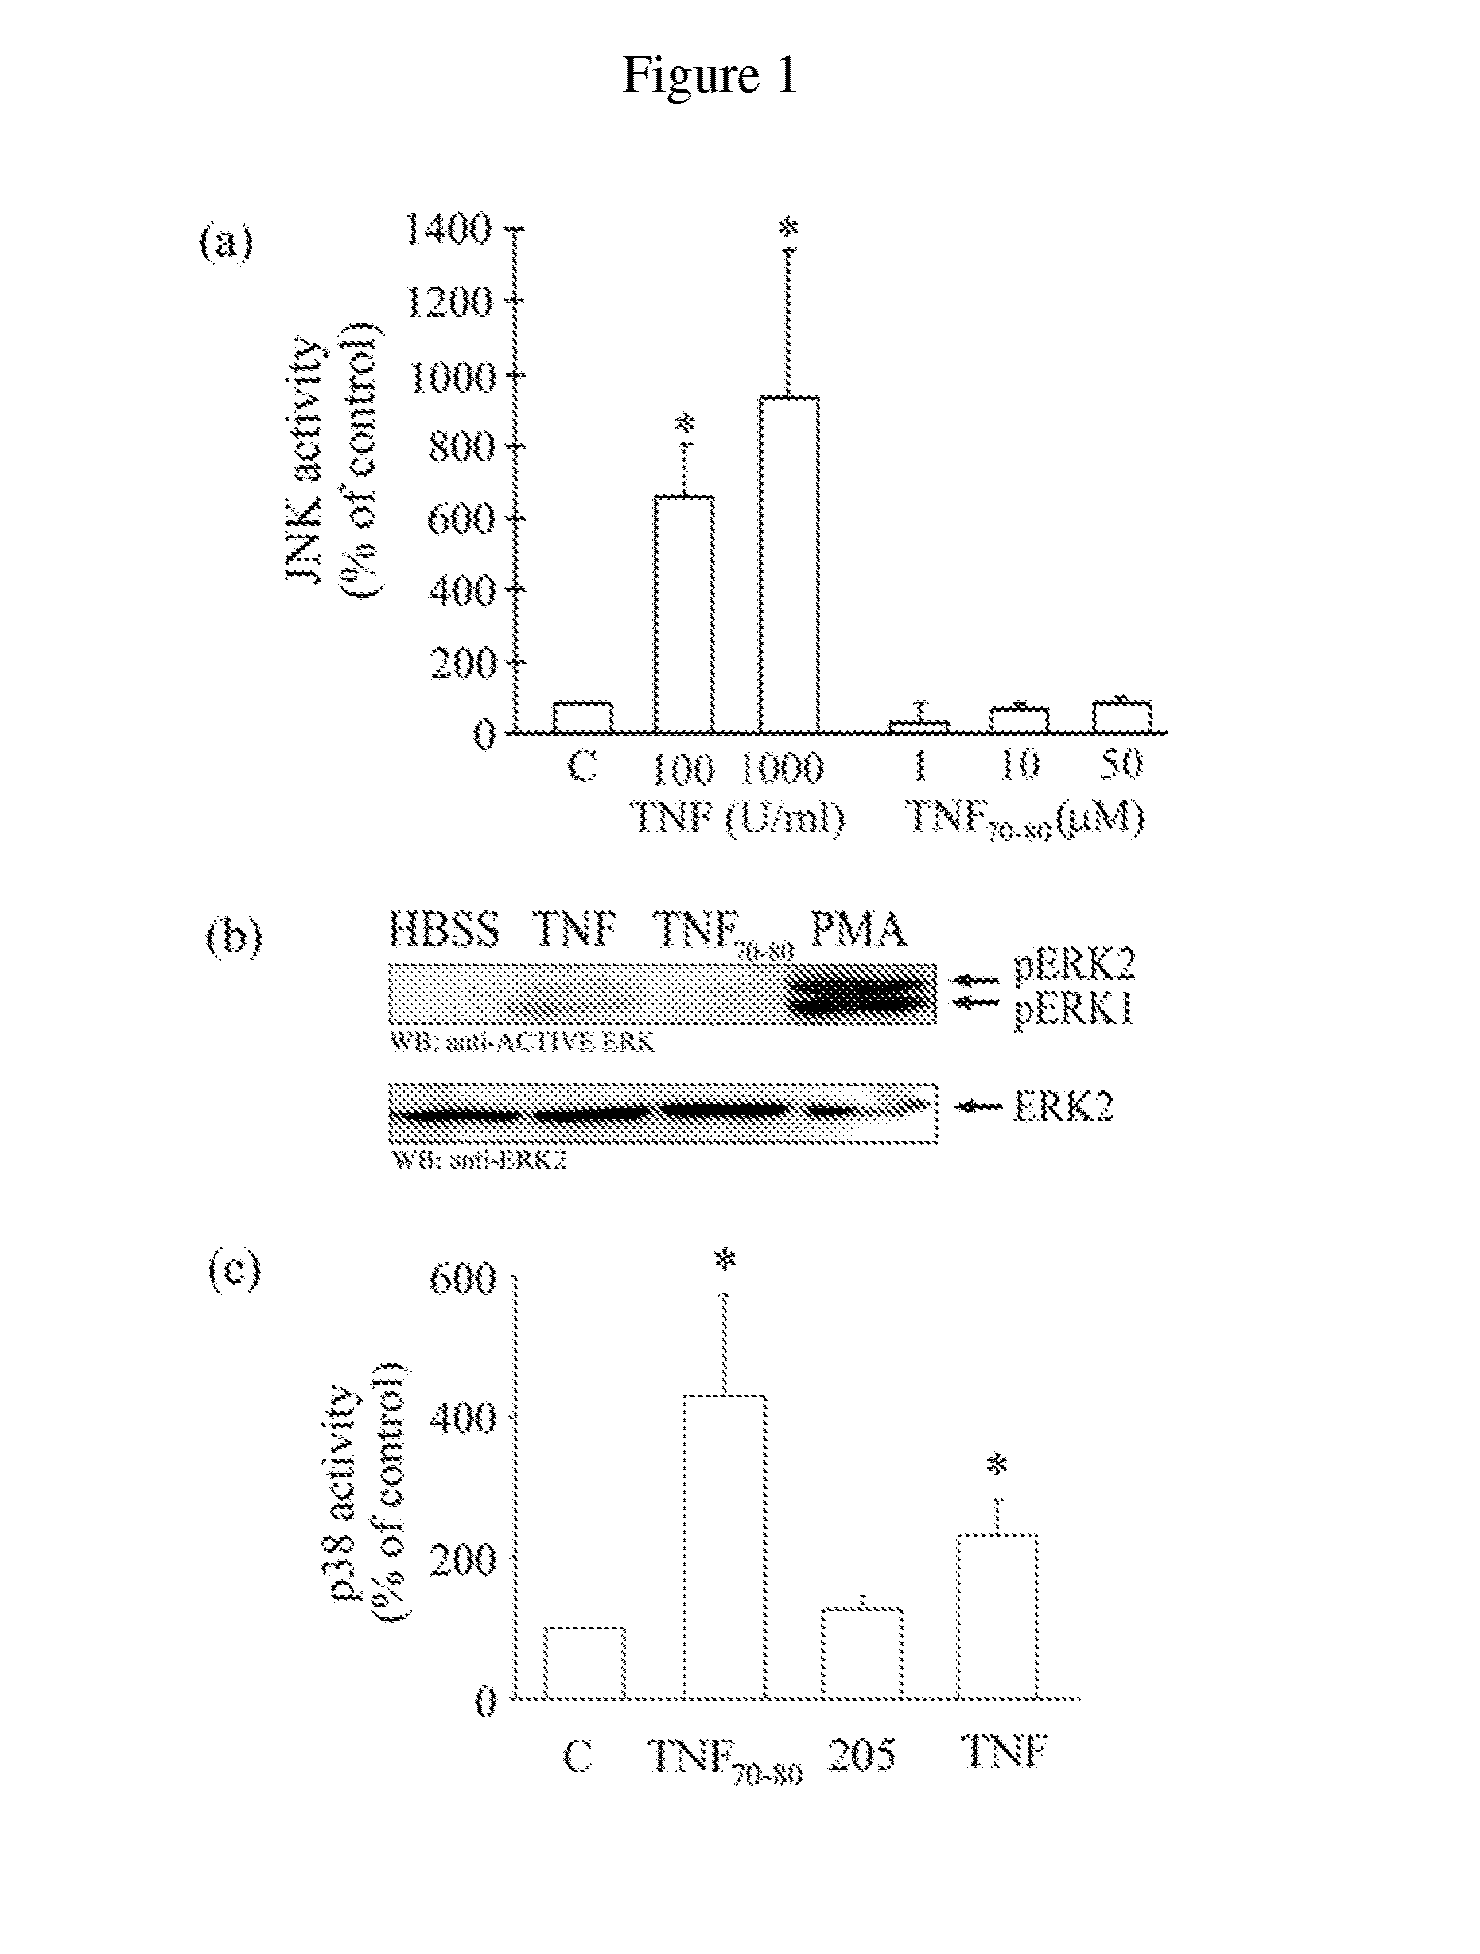 Methods of identifying agents that selectively activate p38 and/or NFkB signaling